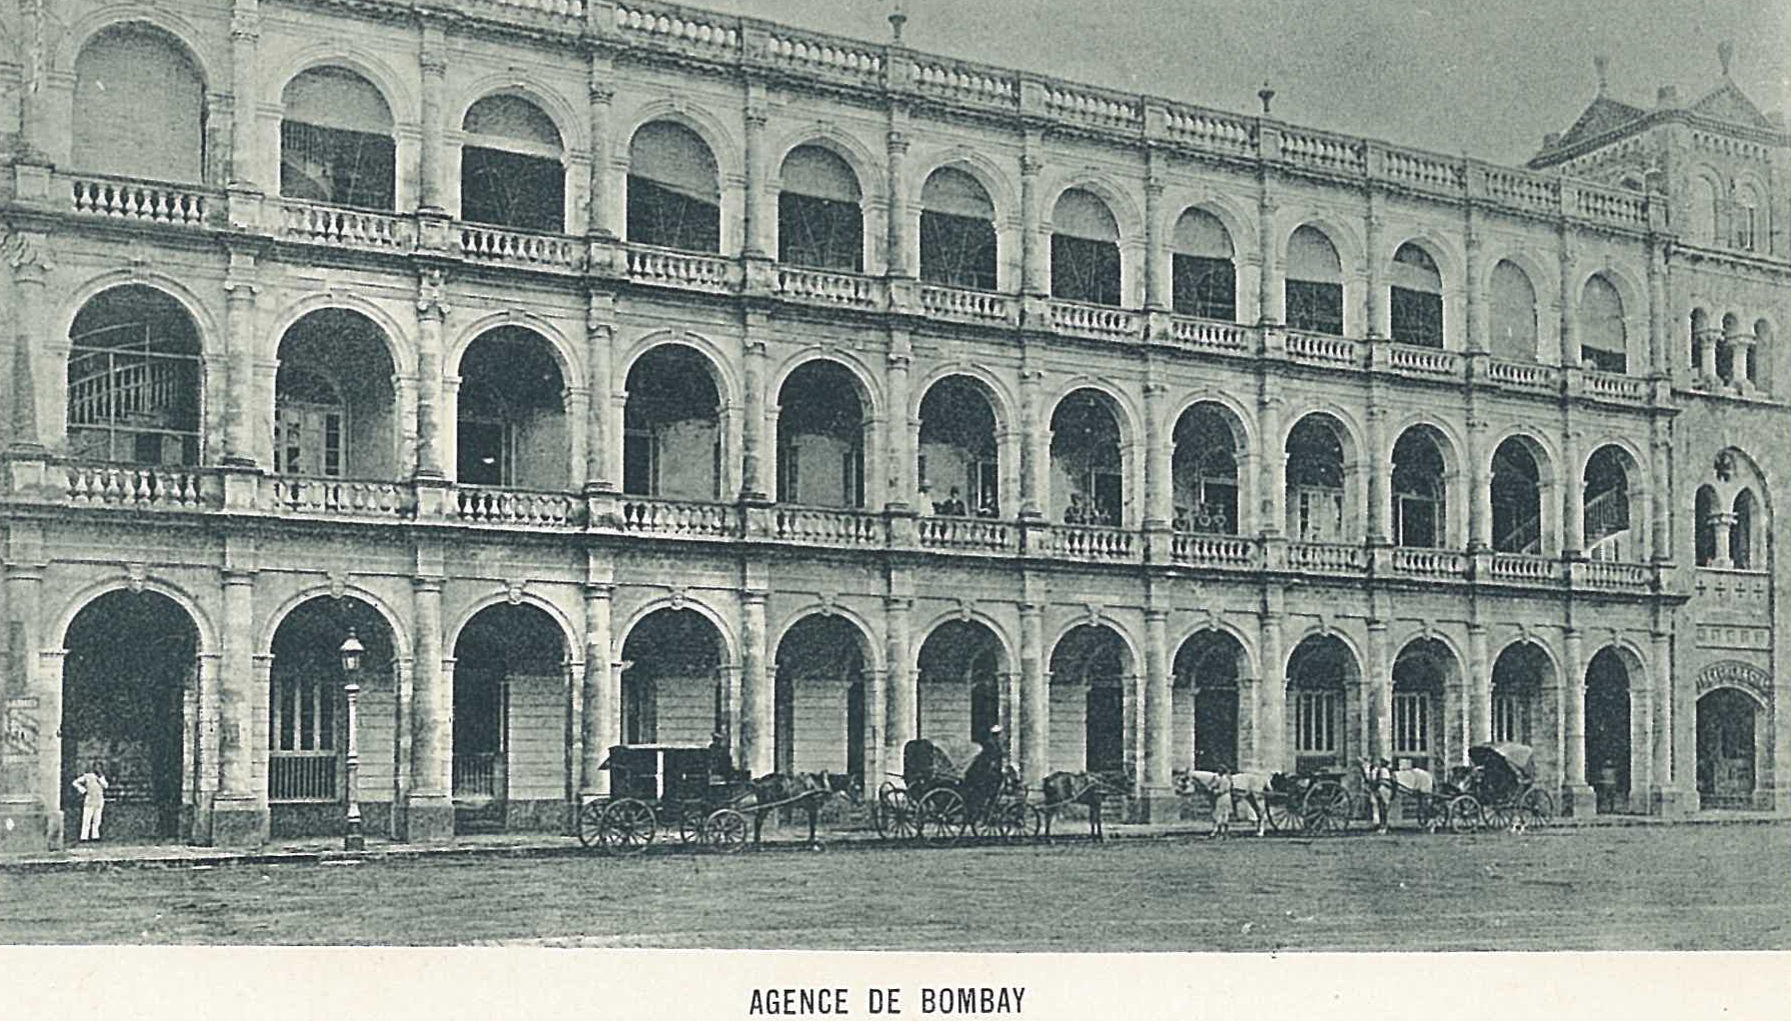 CNEP's branch in Bombay, 1893 - BNP Paribas Historical Collections